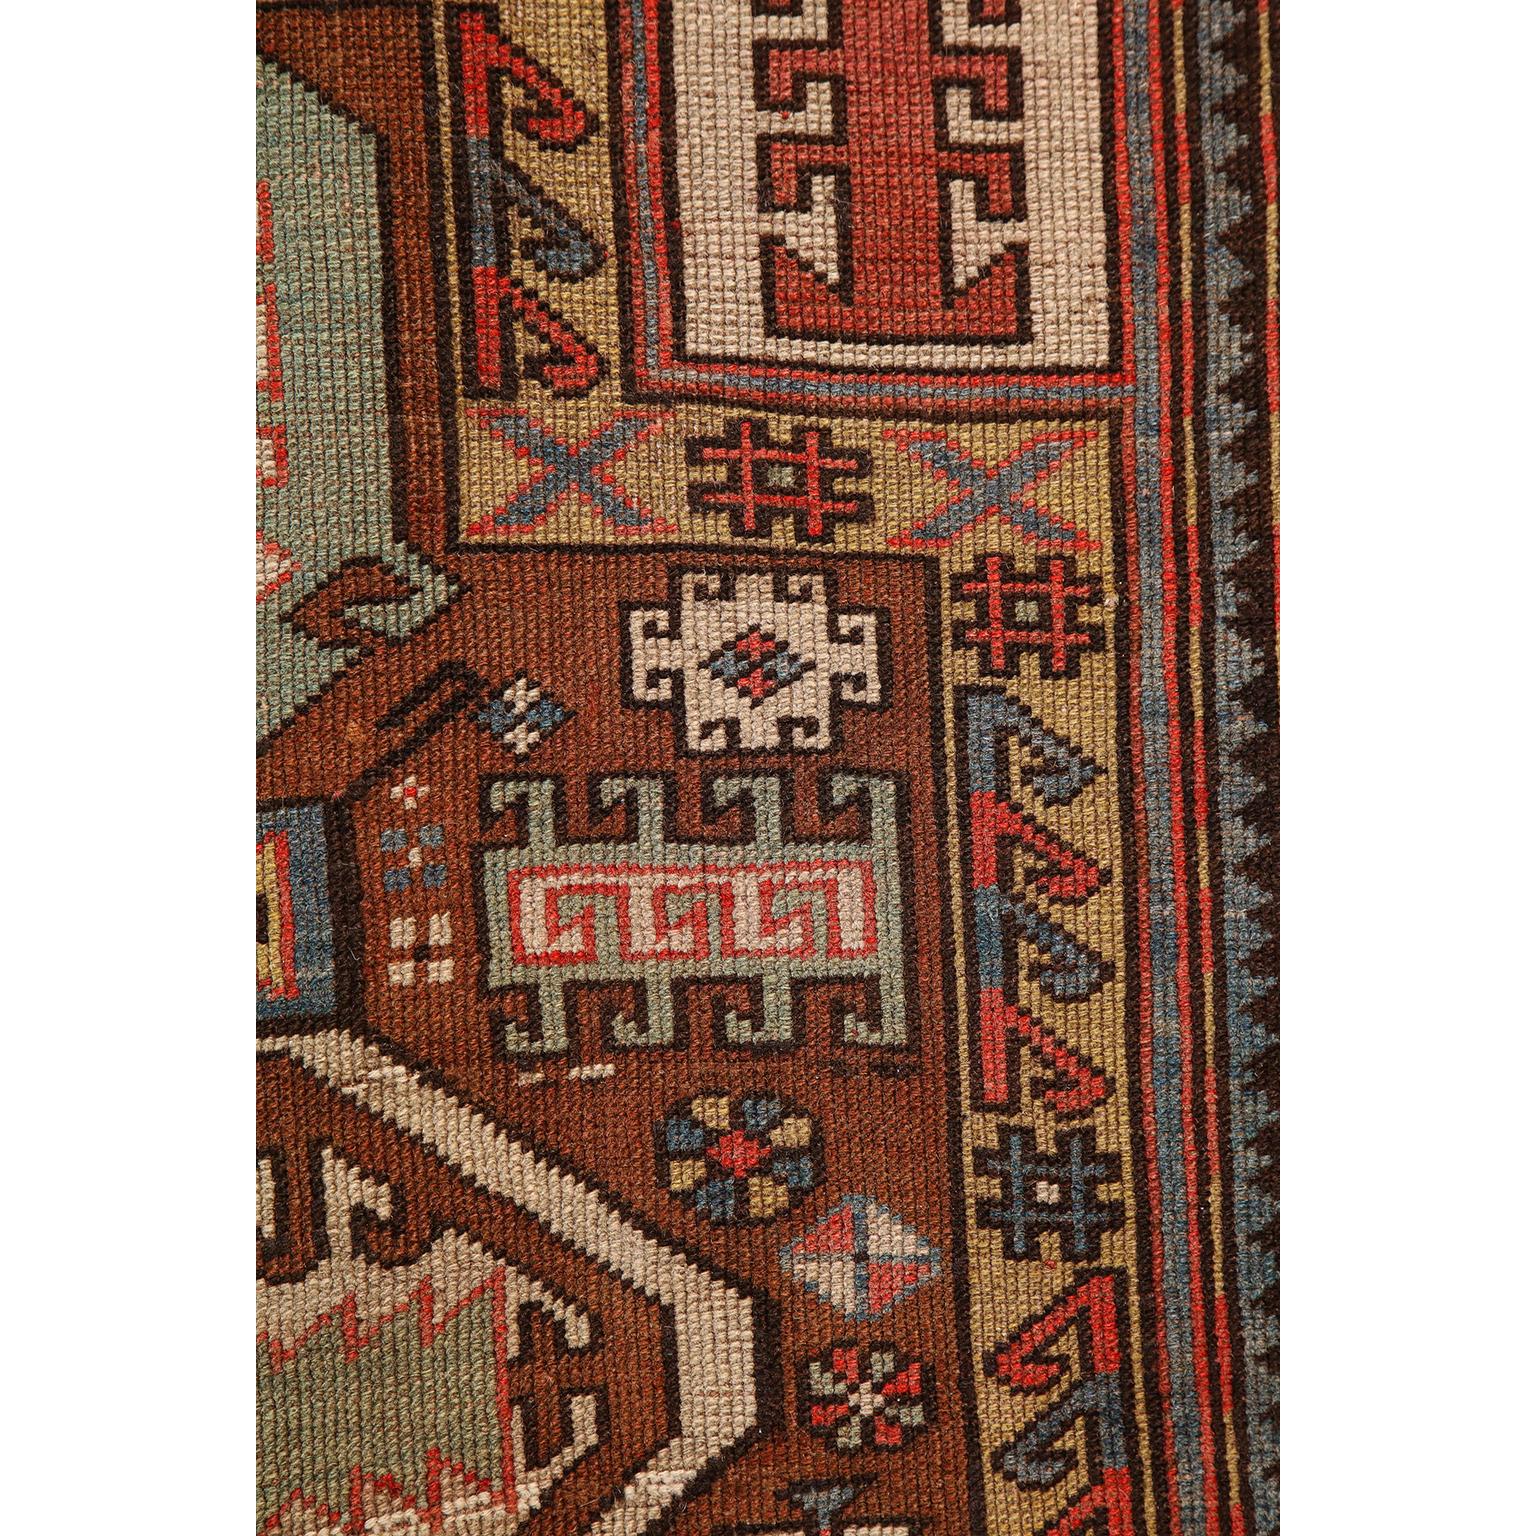 Antique 1880s Caucasian Rug, Hand-knotted Wool, Blue, Green, Red, 4' x 6' For Sale 5